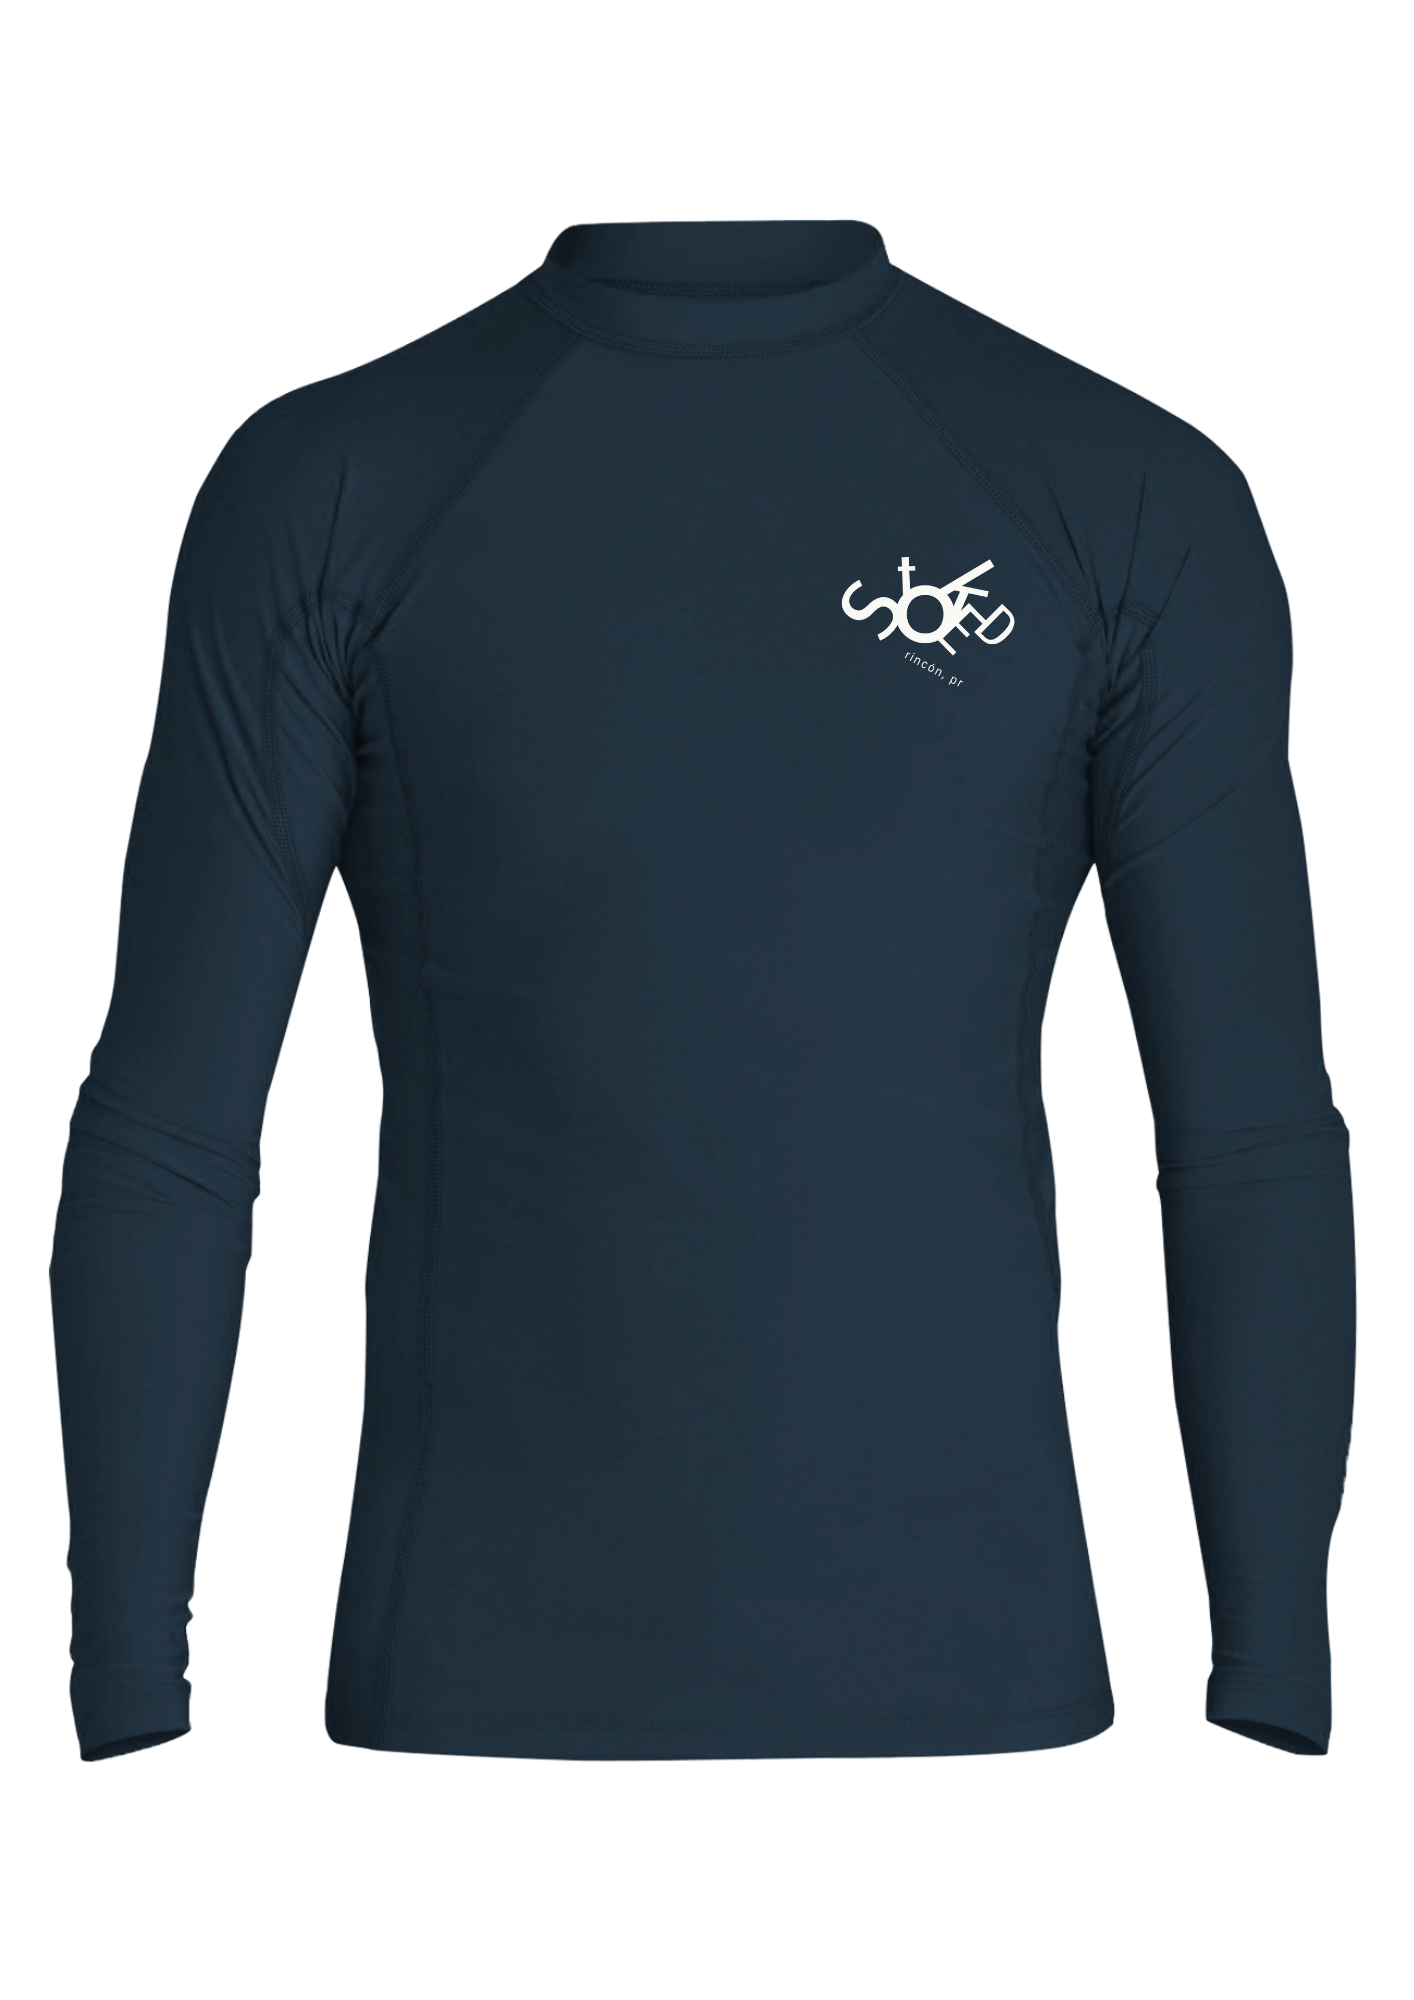 Stoked Fuse Performance Long Sleeve